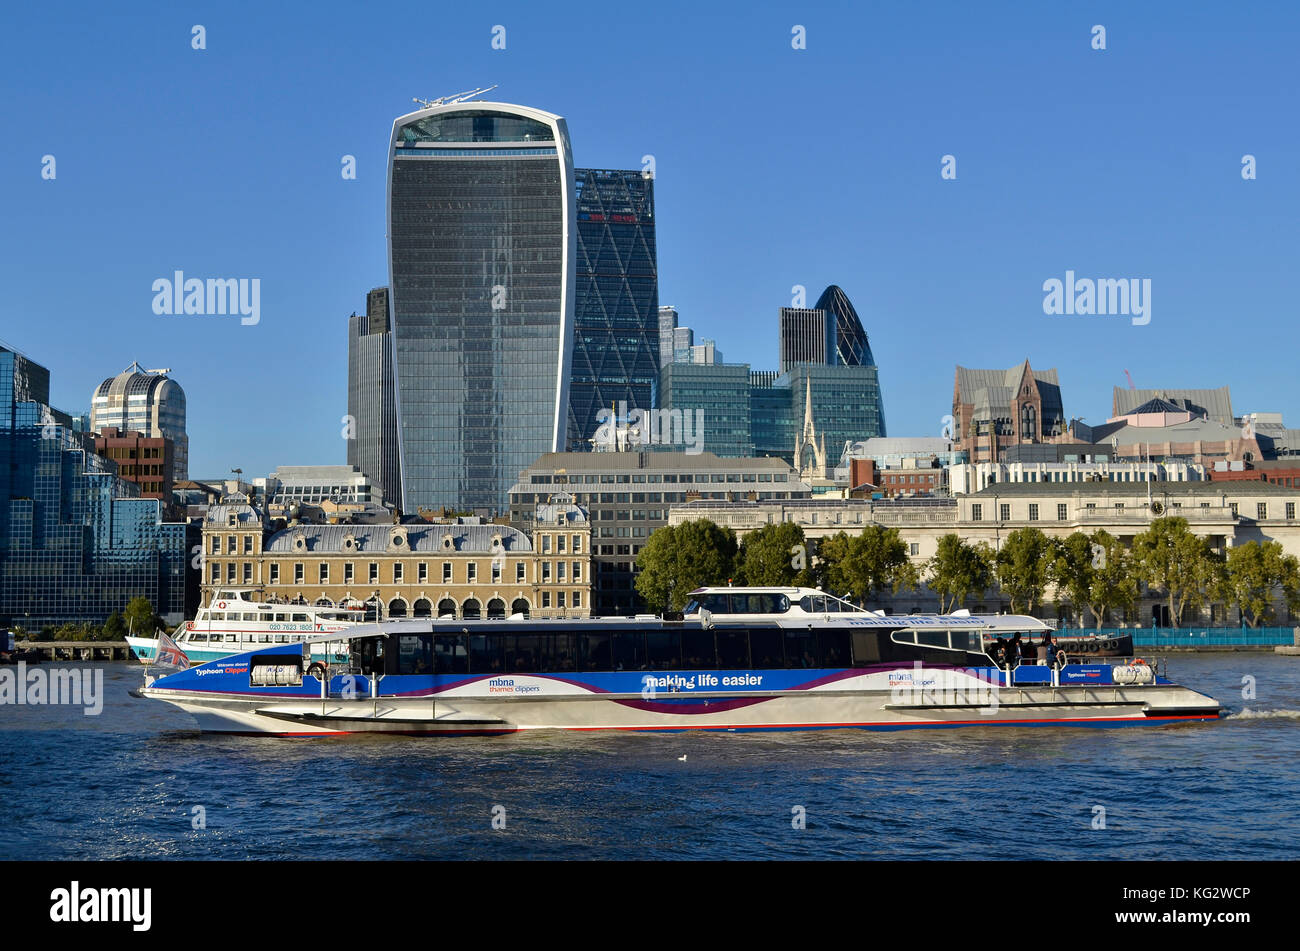 Financial District, London, UK. 20 Fenchurch Street, Leadenhall Building, Tower 42, and Gherkin all visible. Stock Photo